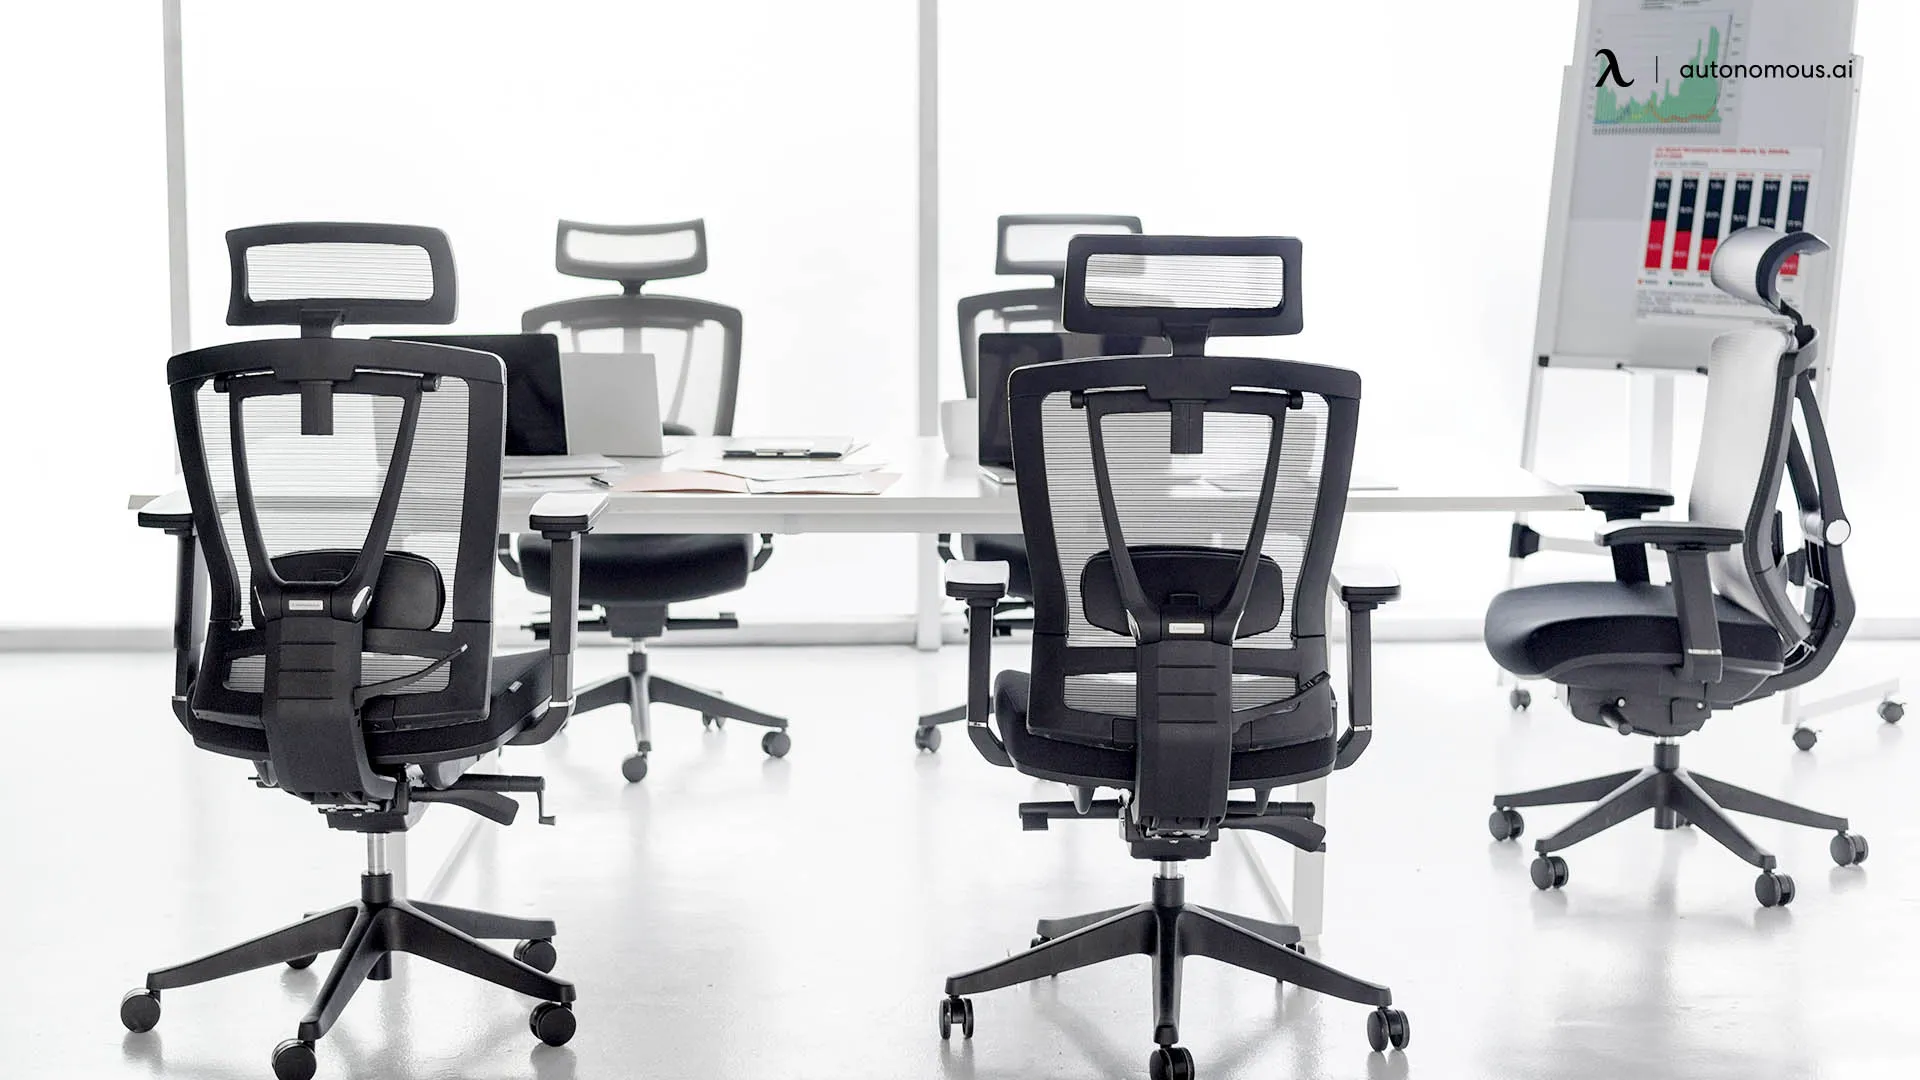 How Can You Pick the Best Chair Design for Offices?